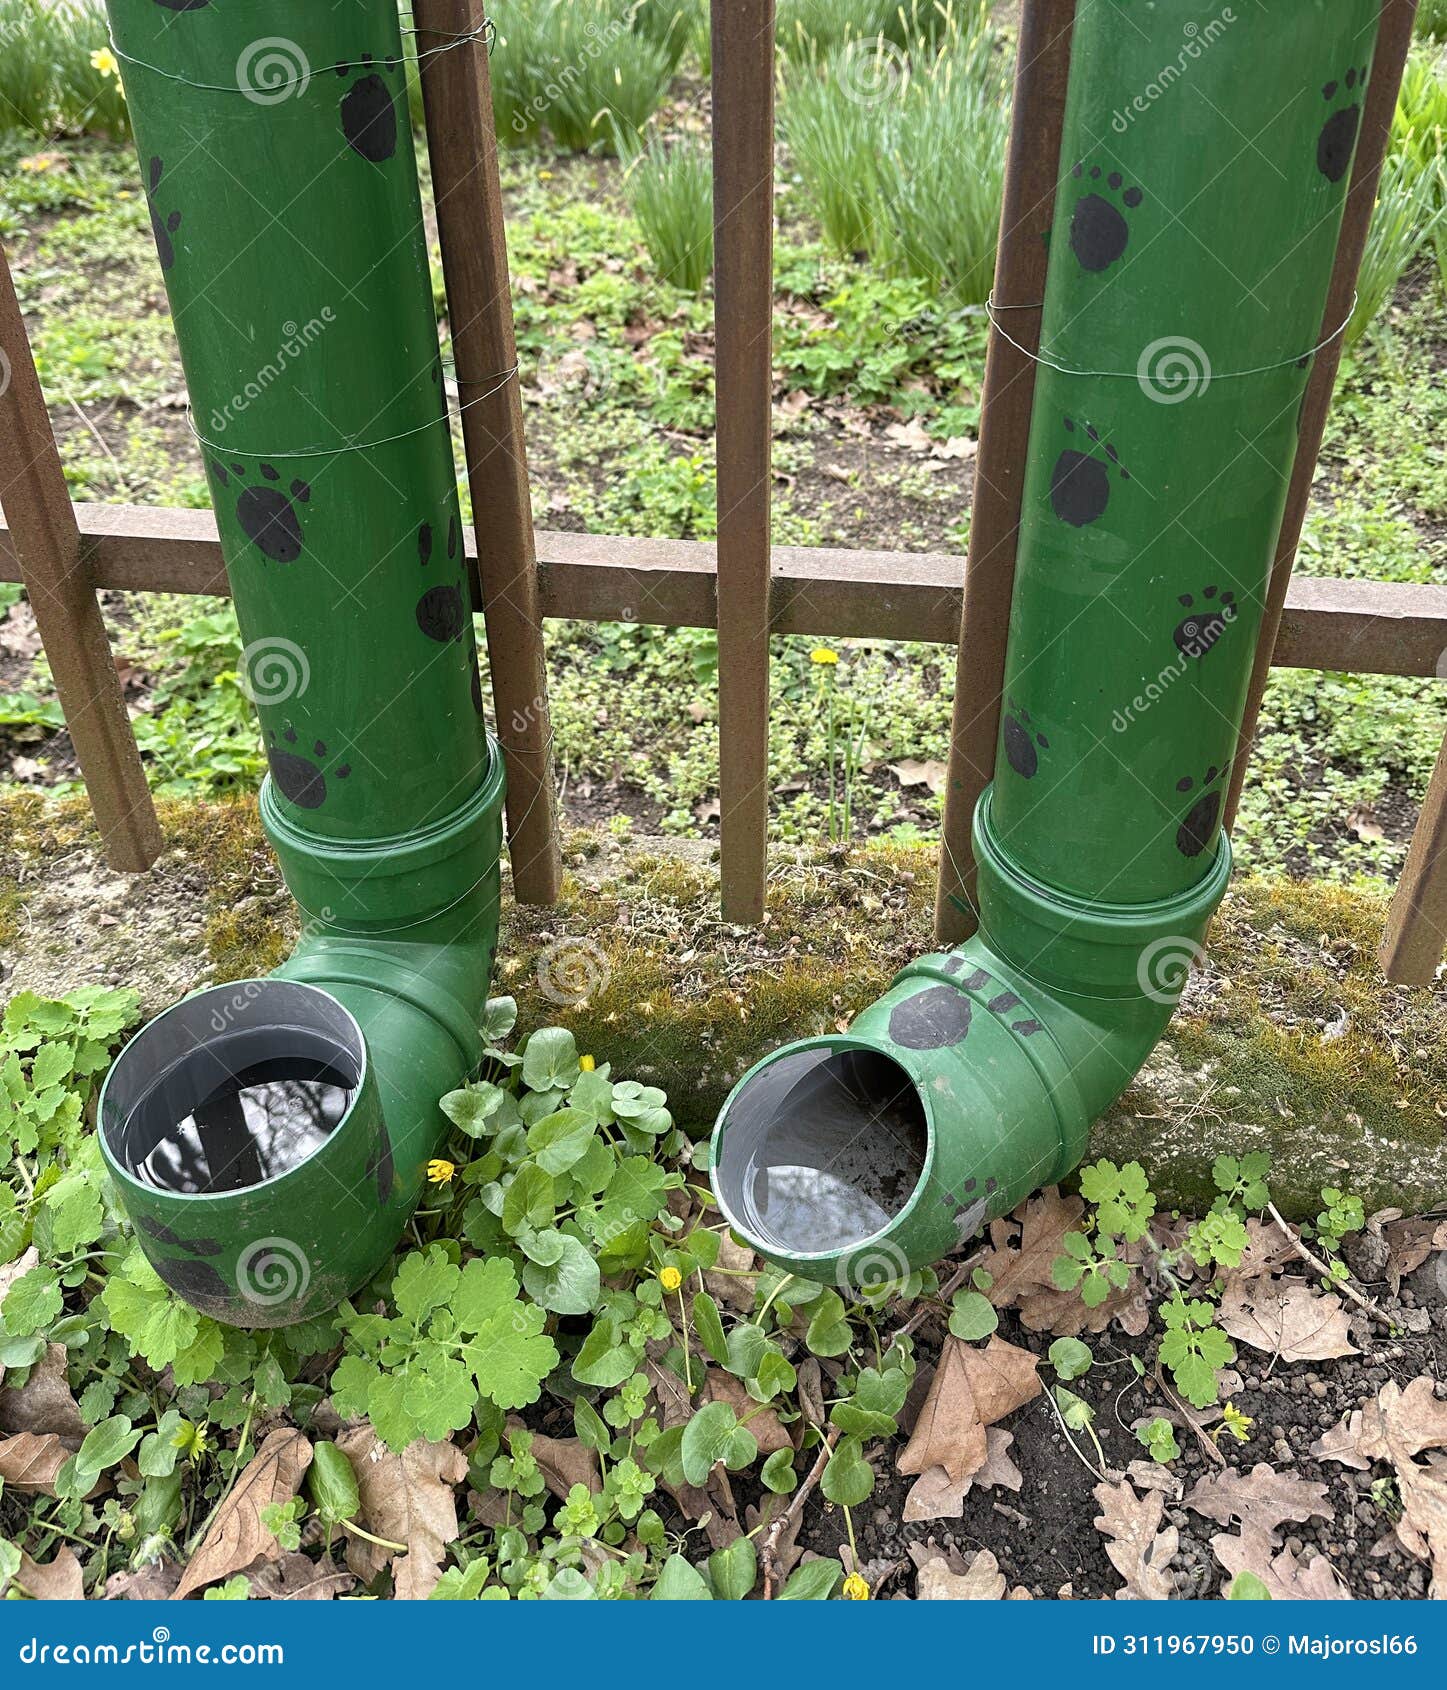 plastic pipes as animal drinker for cats and dogs